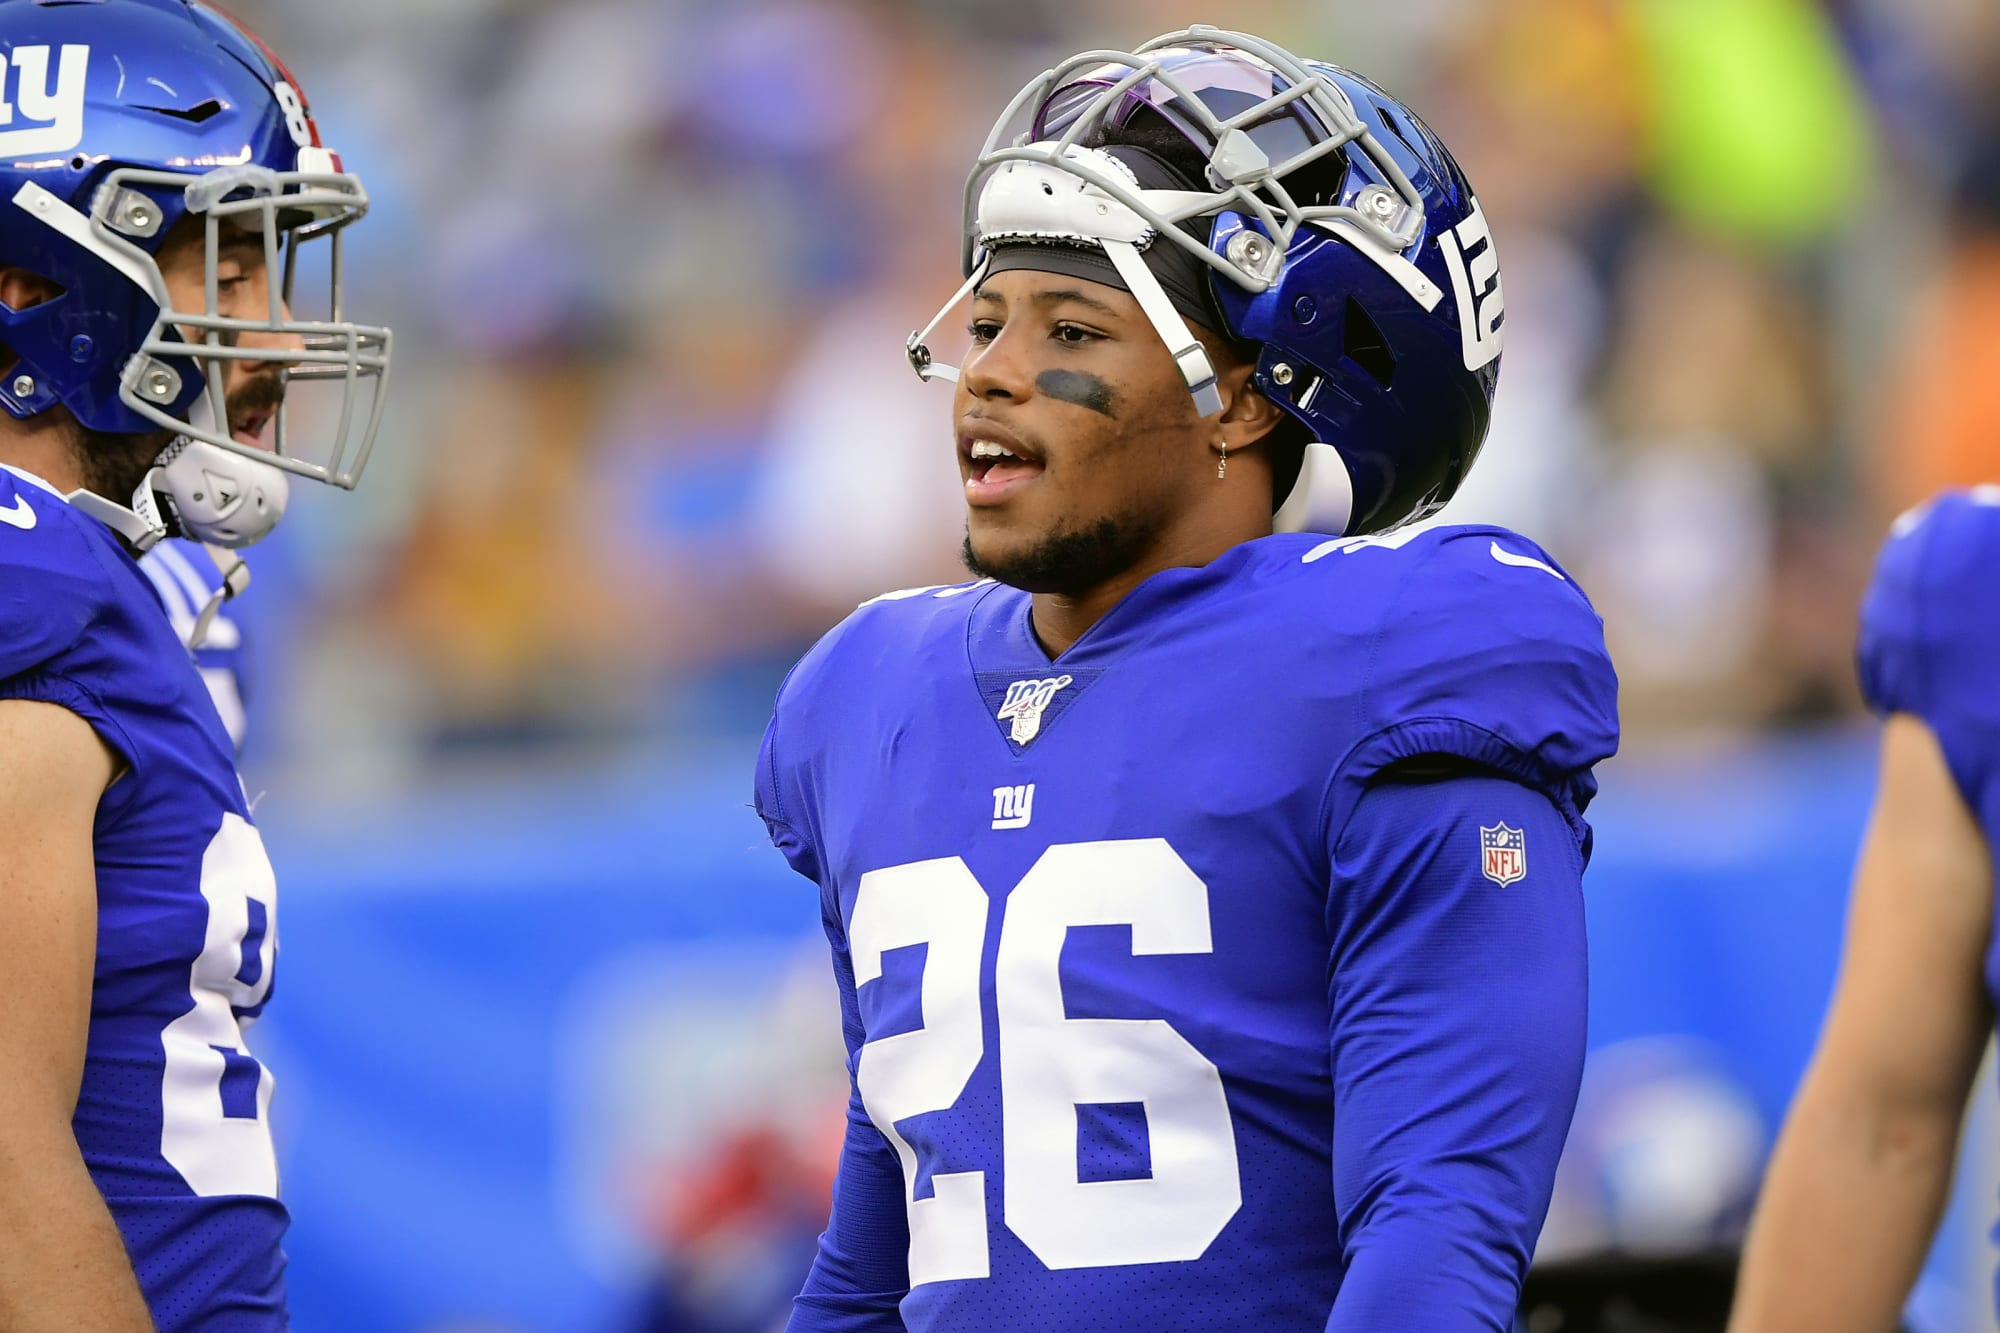 Rookie Saquon Barkley has top-selling NFL jersey without playing a down